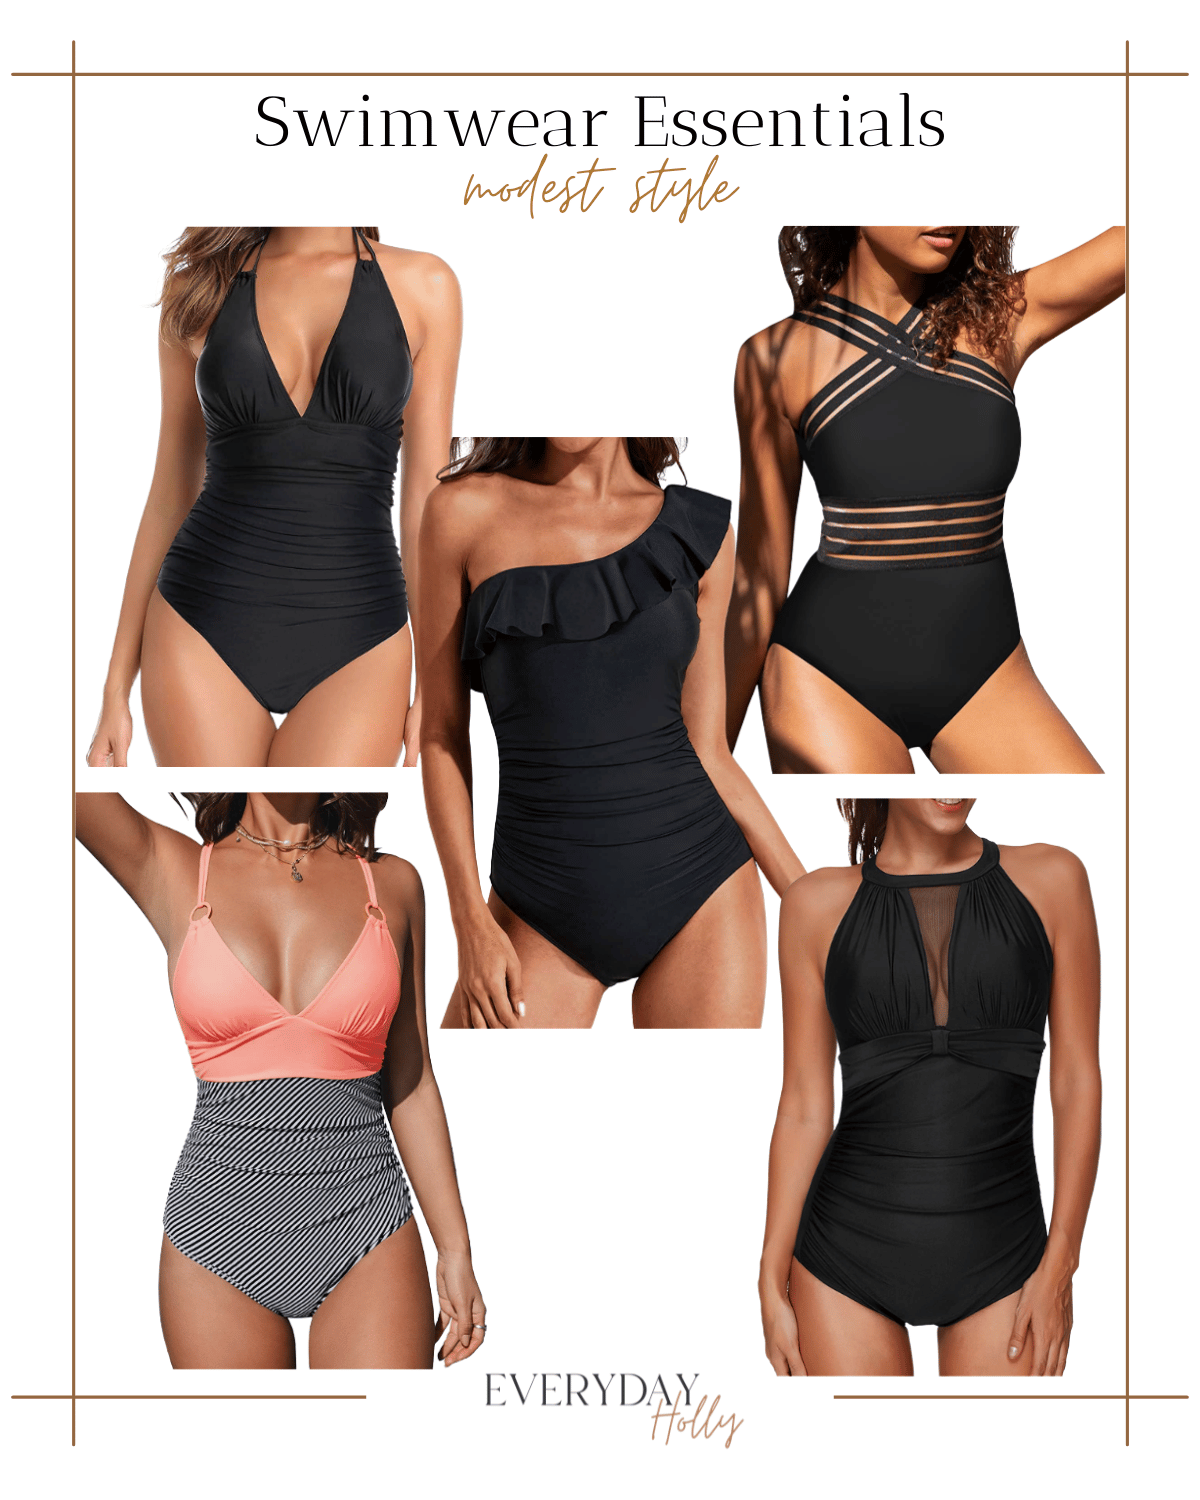 modest style bathing suits, one piece bathing suits, one shoulder swimsuit, swimwear essentials 